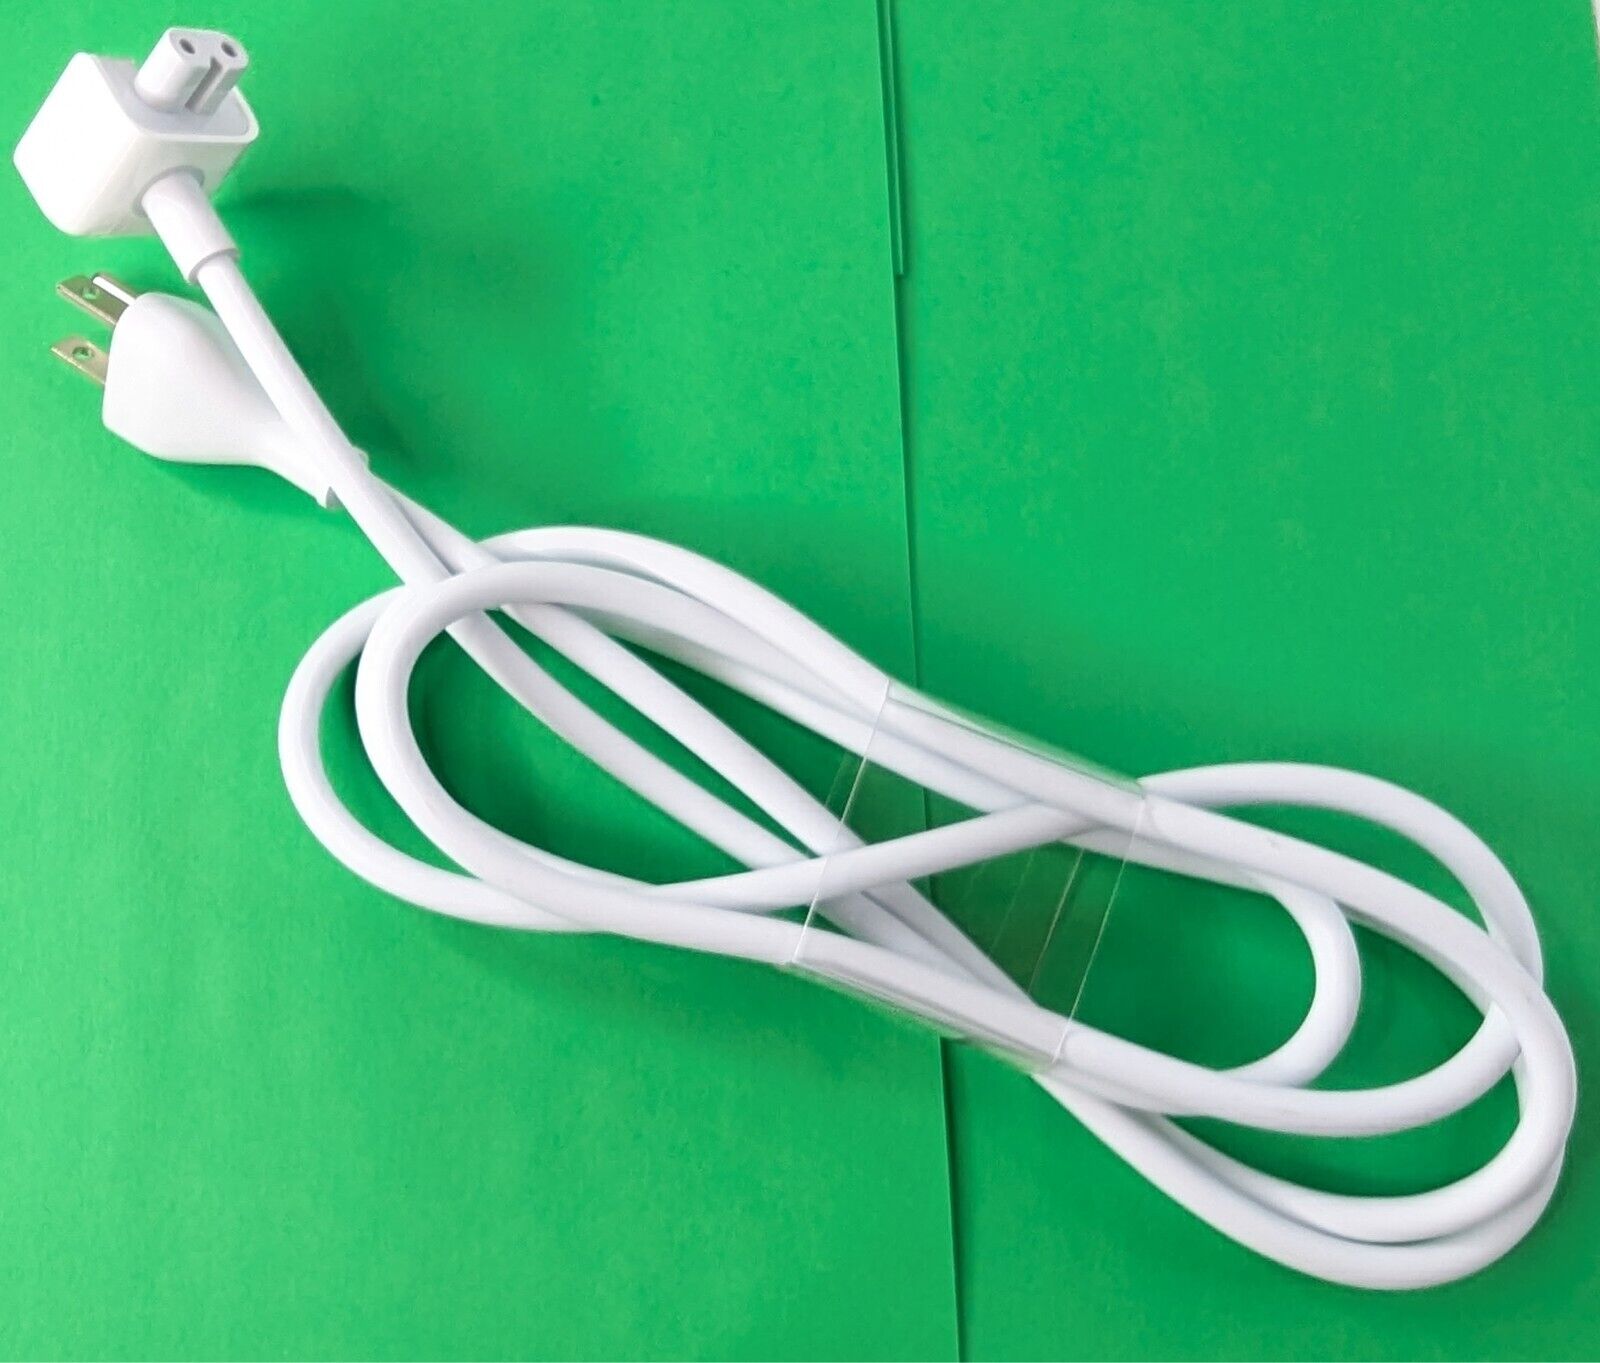 Authentic Apple MacBook Pro Power Adapter Charger Extension Cord Cable 6ft